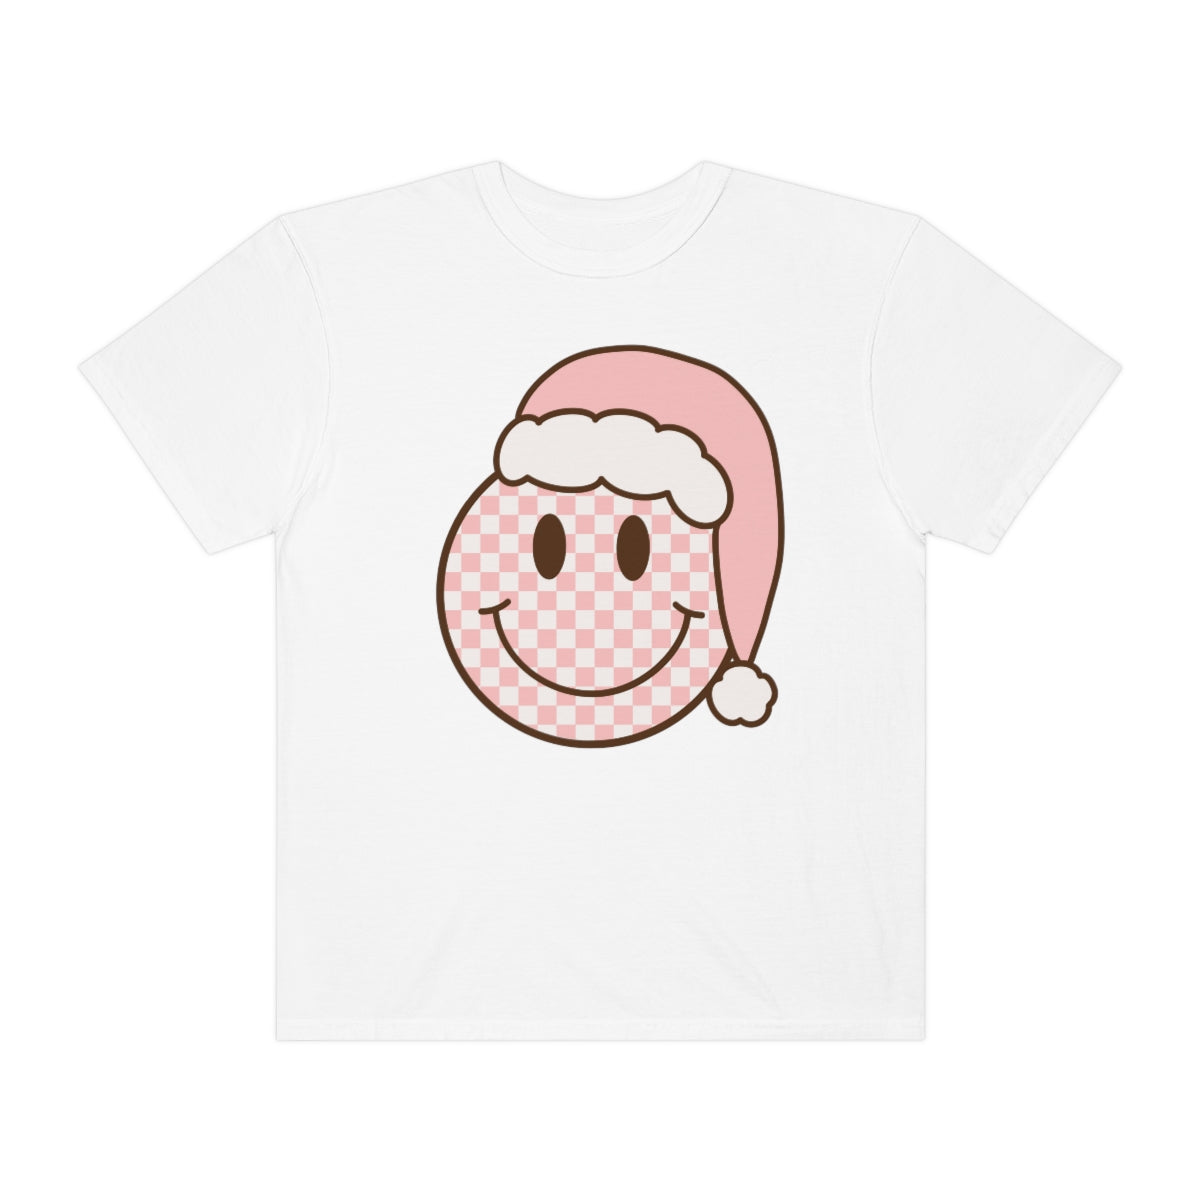 Checkered Christmas Smiley Unisex Garment-Dyed T-shirt